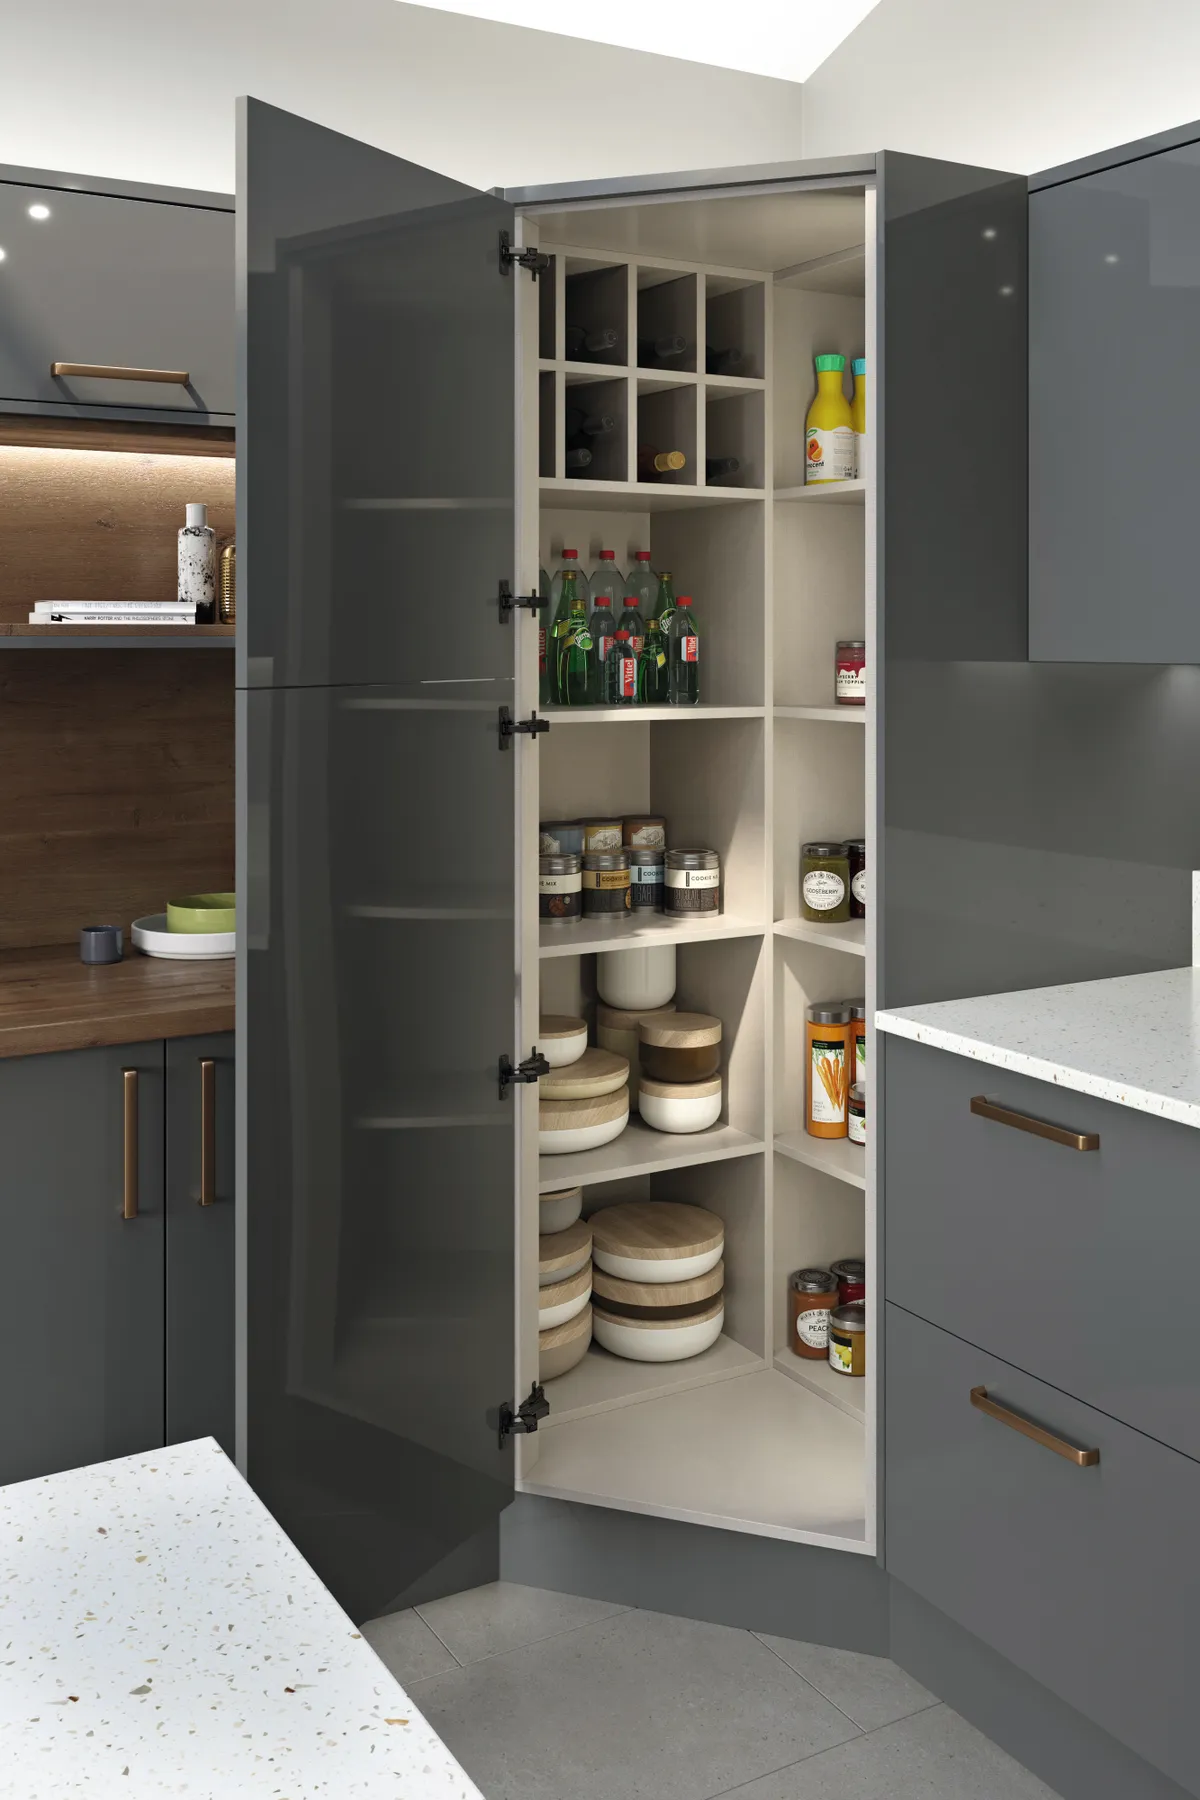 This corner larder optimises space that’s often hard to reach, allowing you to view and access the contents with ease. Complete kitchens start from around £4,000, LochAnna Kitchens